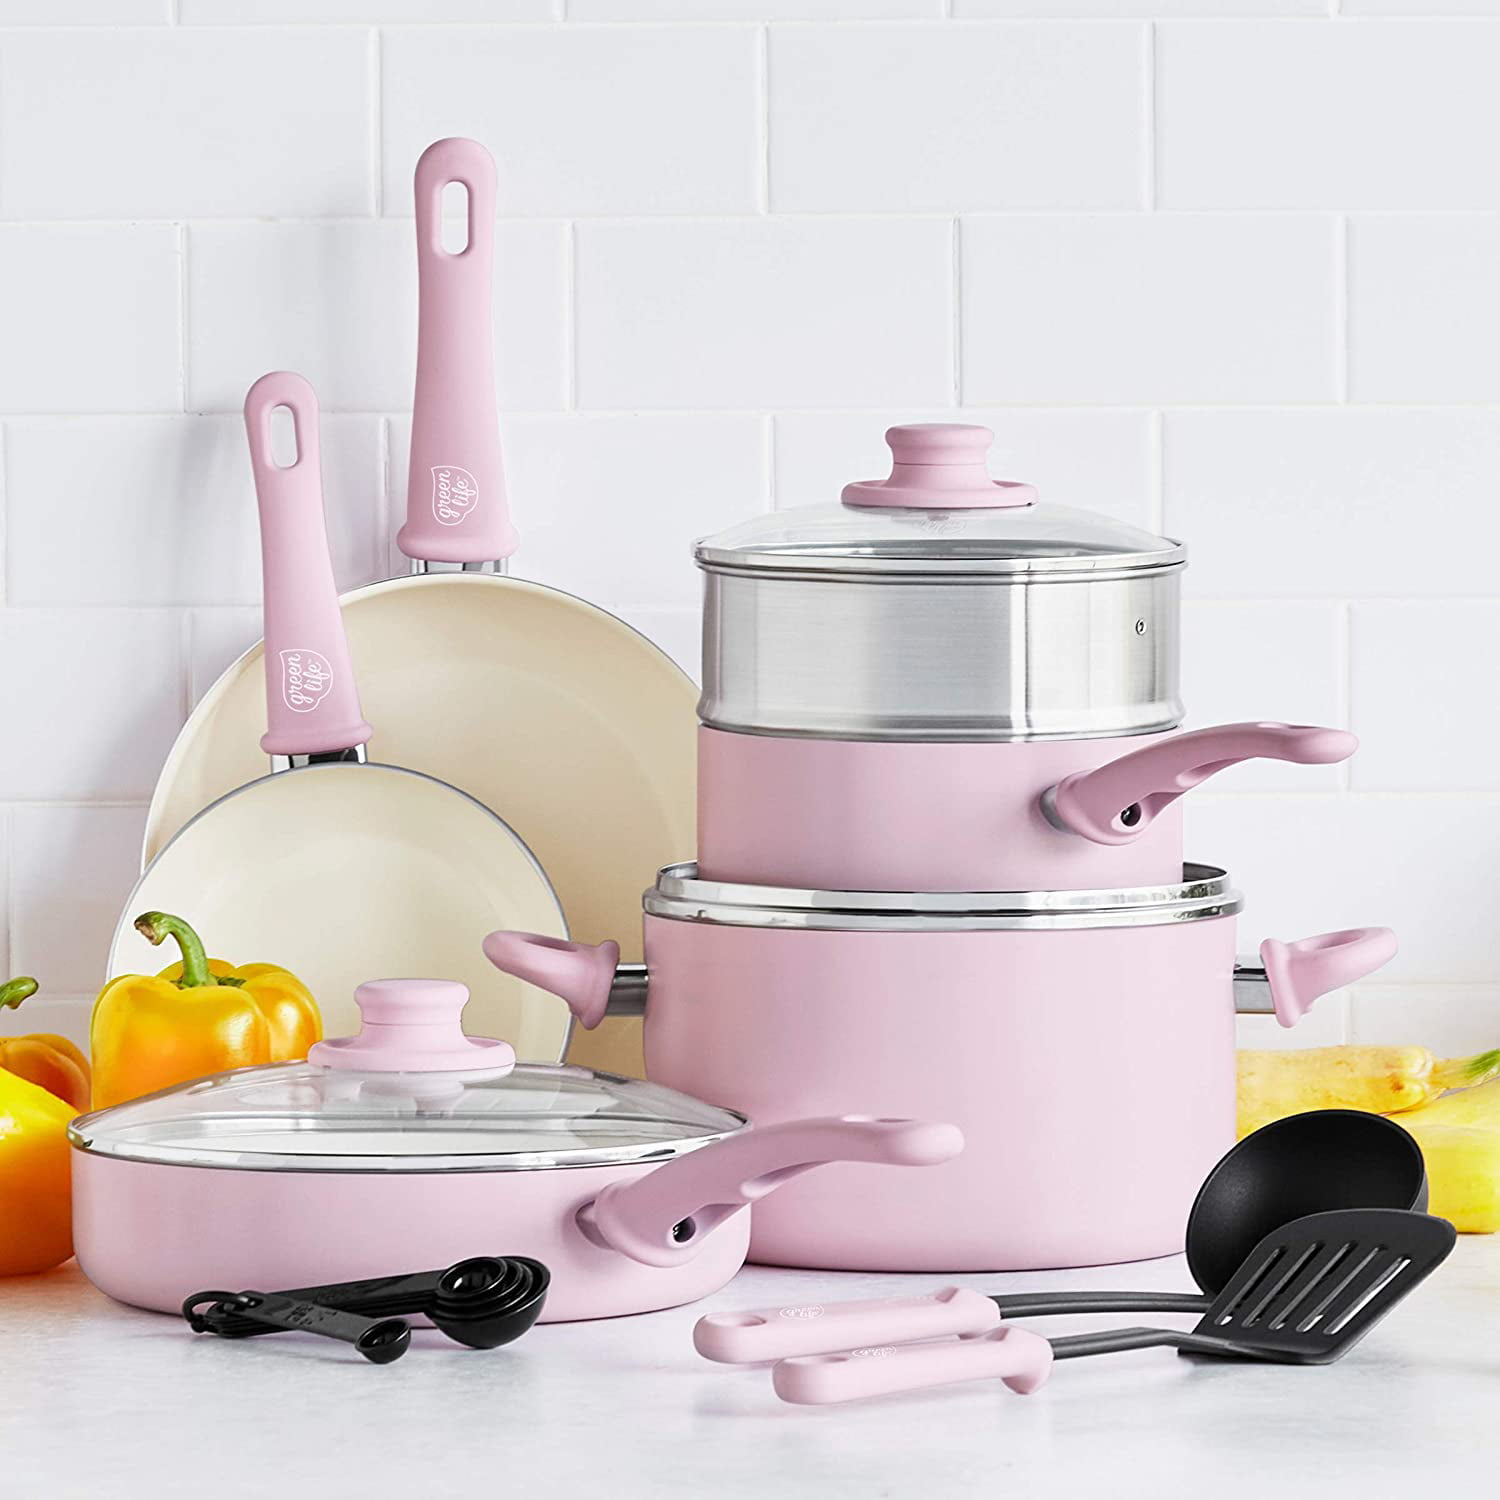 Give your Kitchen the Feminine Touch with these Cool Pink Pots and Pans